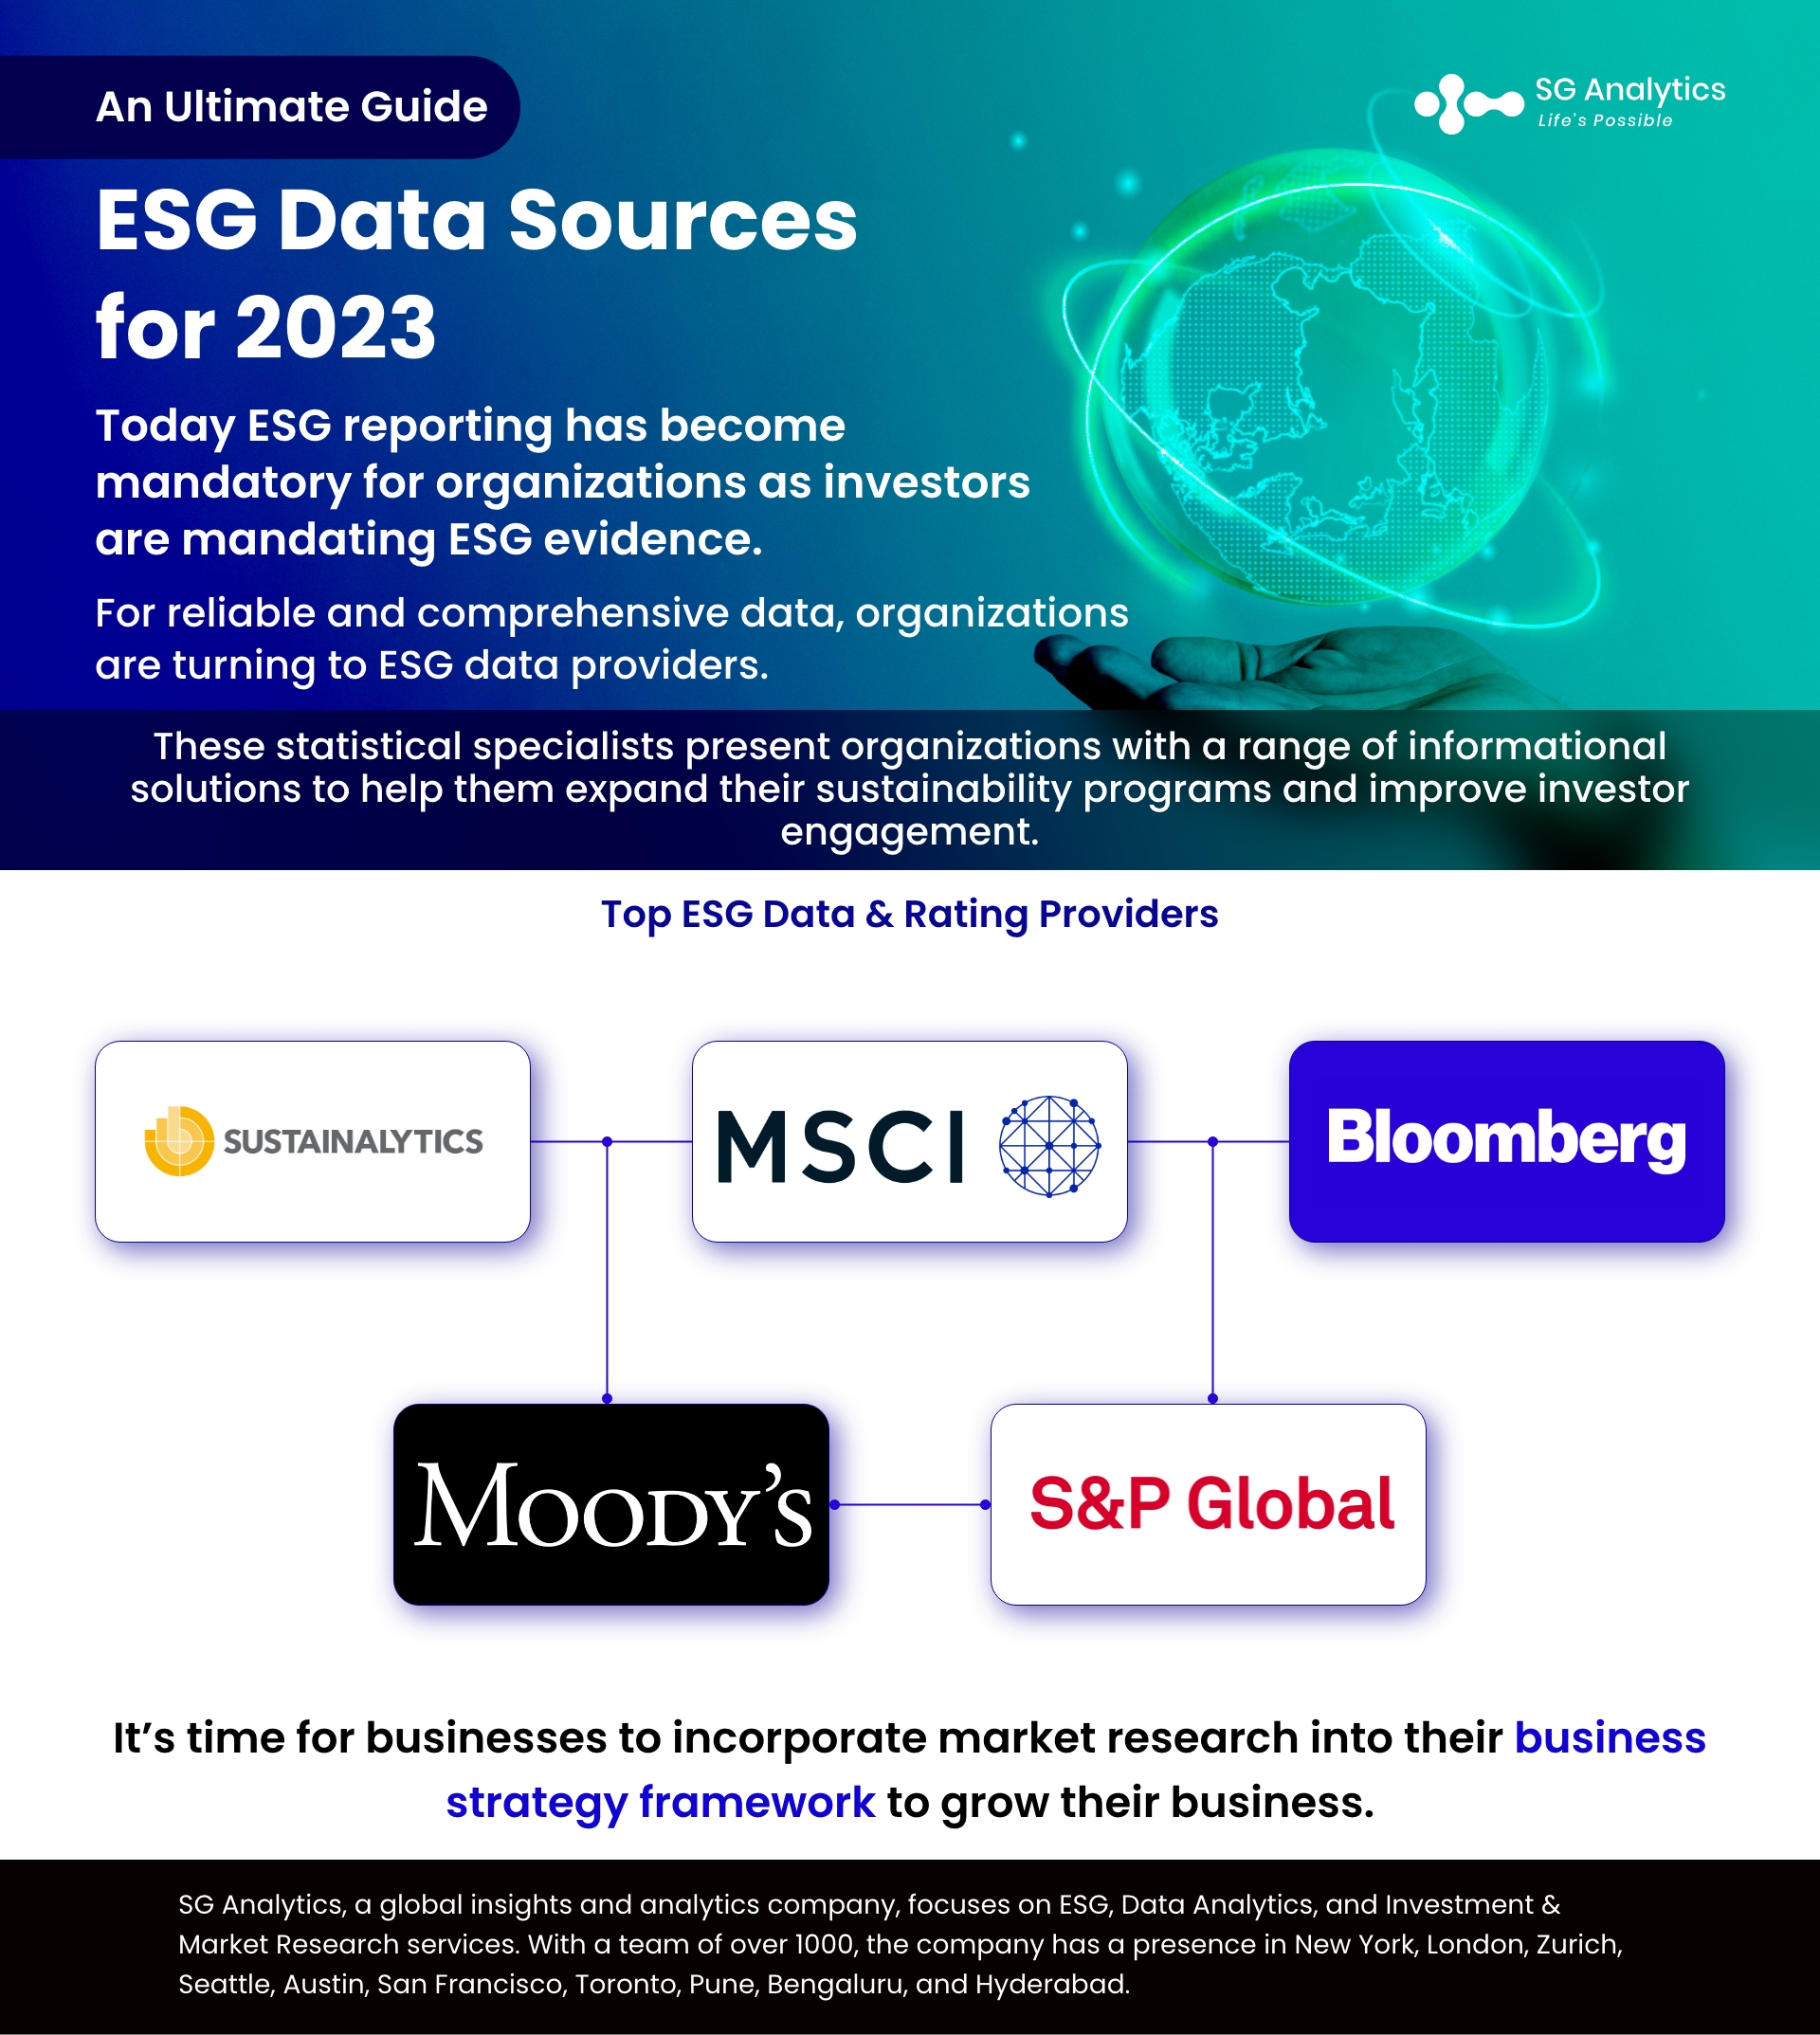 An Ultimate Guide - ESG Data Sources for 2023